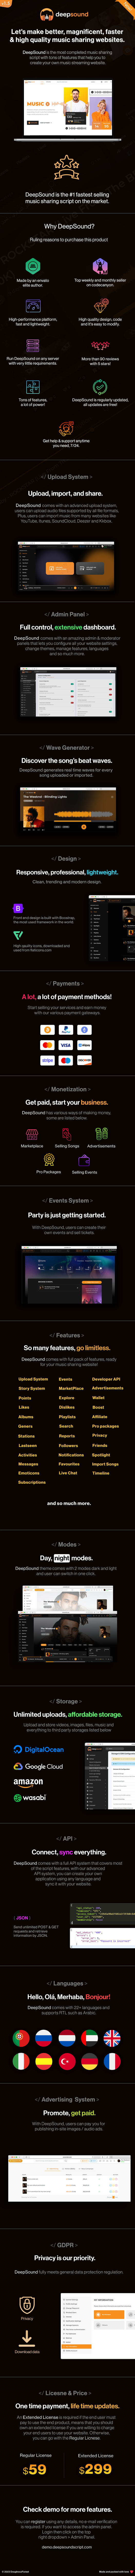 DeepSound - The Ultimate PHP Music Sharing & Streaming Platform - 1